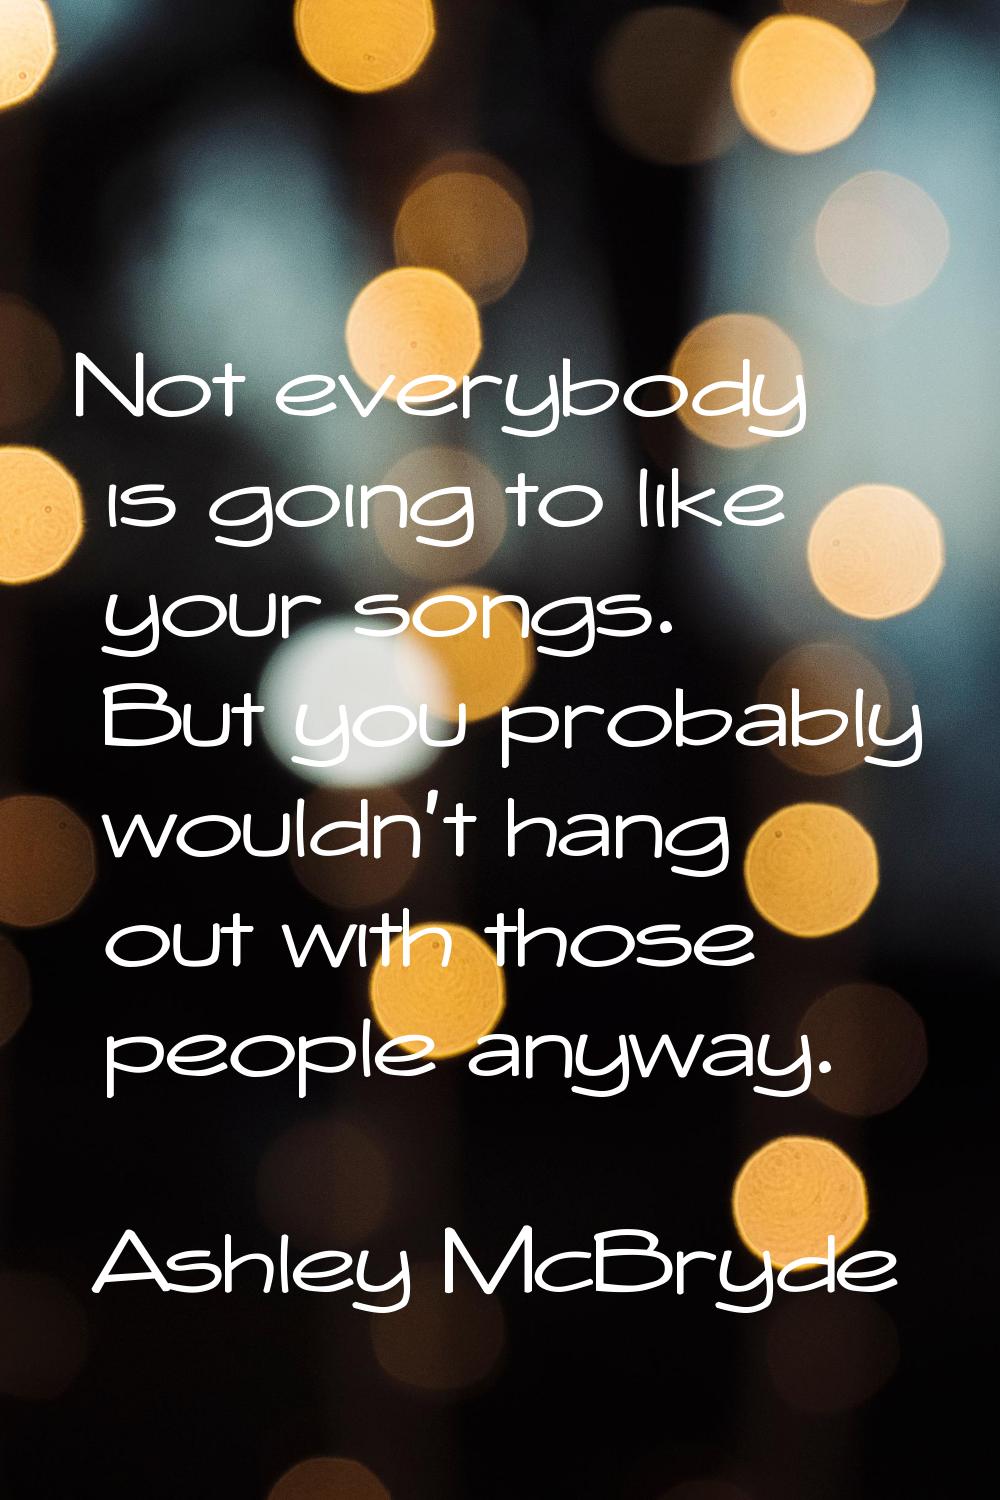 Not everybody is going to like your songs. But you probably wouldn't hang out with those people any